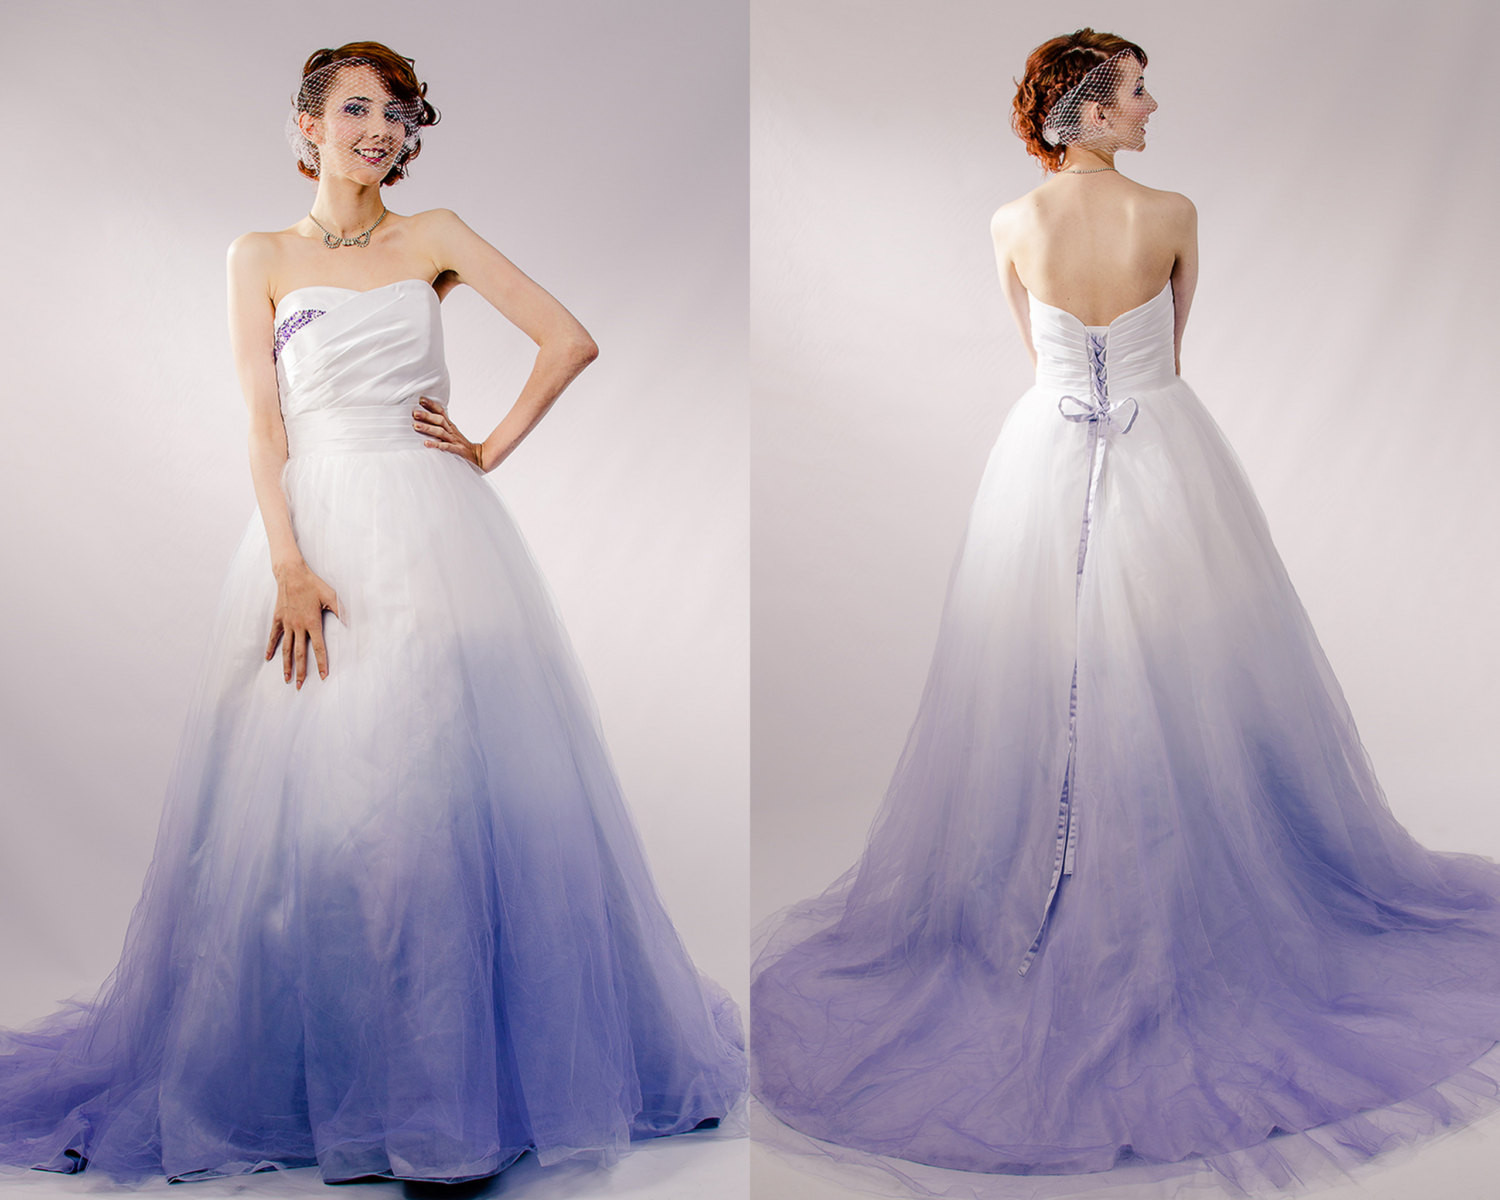 Colorful Wedding Dress
 Glamour Gra nt Colored Wedding Dress Ideas for colorful